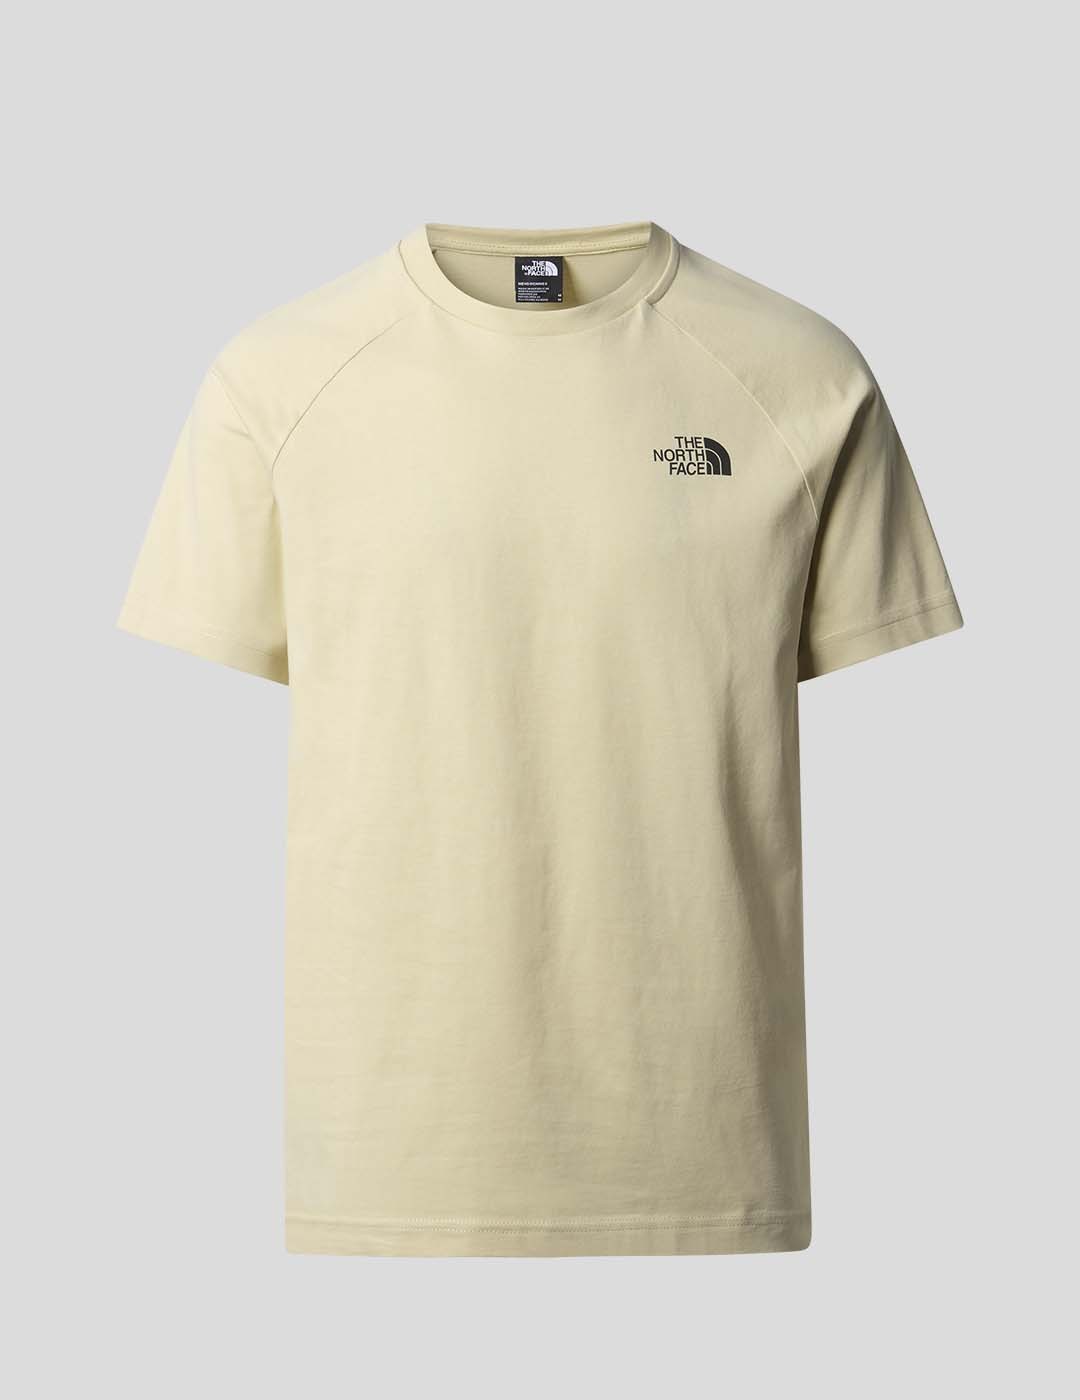 CAMISETA THE NORTH FACE NORTH FACES TEE   GRAVEL